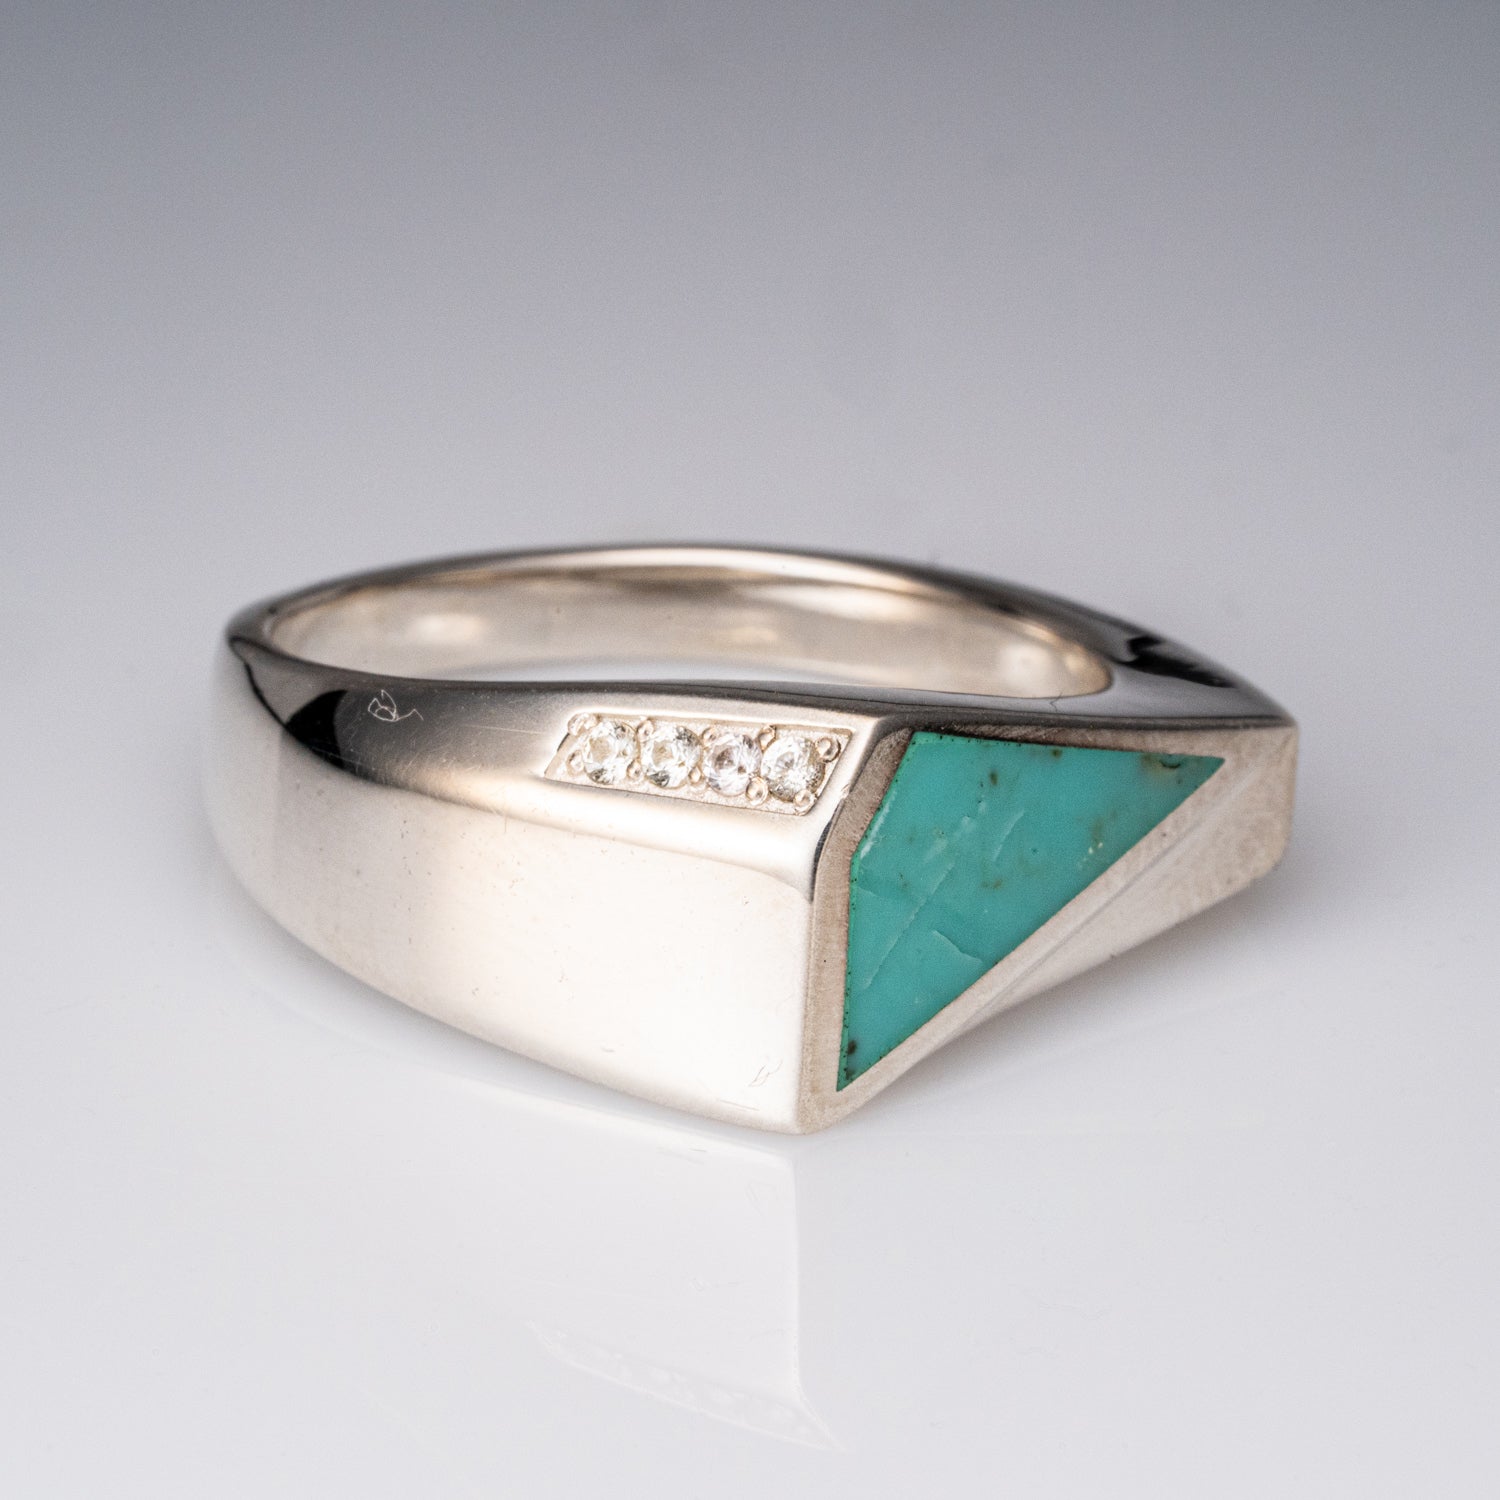 Genuine Turquoise Sterling Silver Men's Ring (Size 10.5)